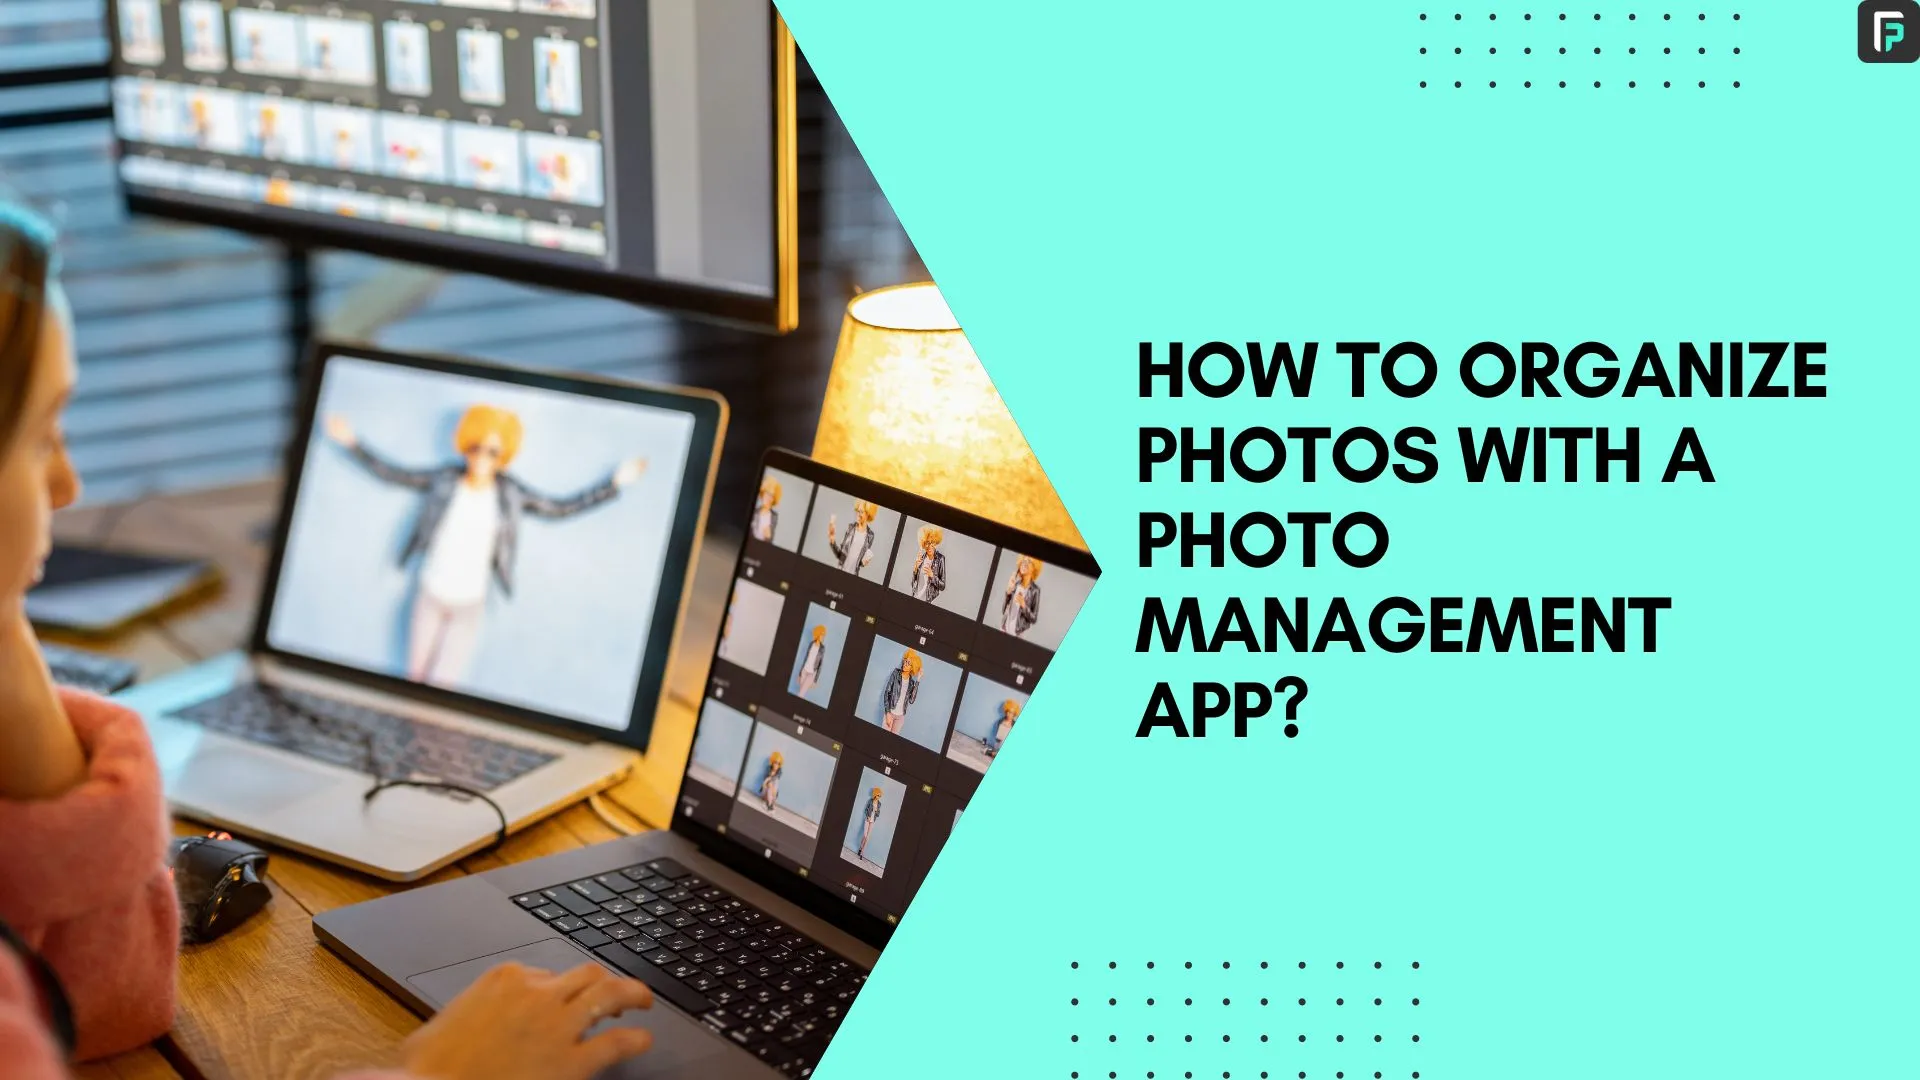 How to organize photos with a Photo Management App Image Banner